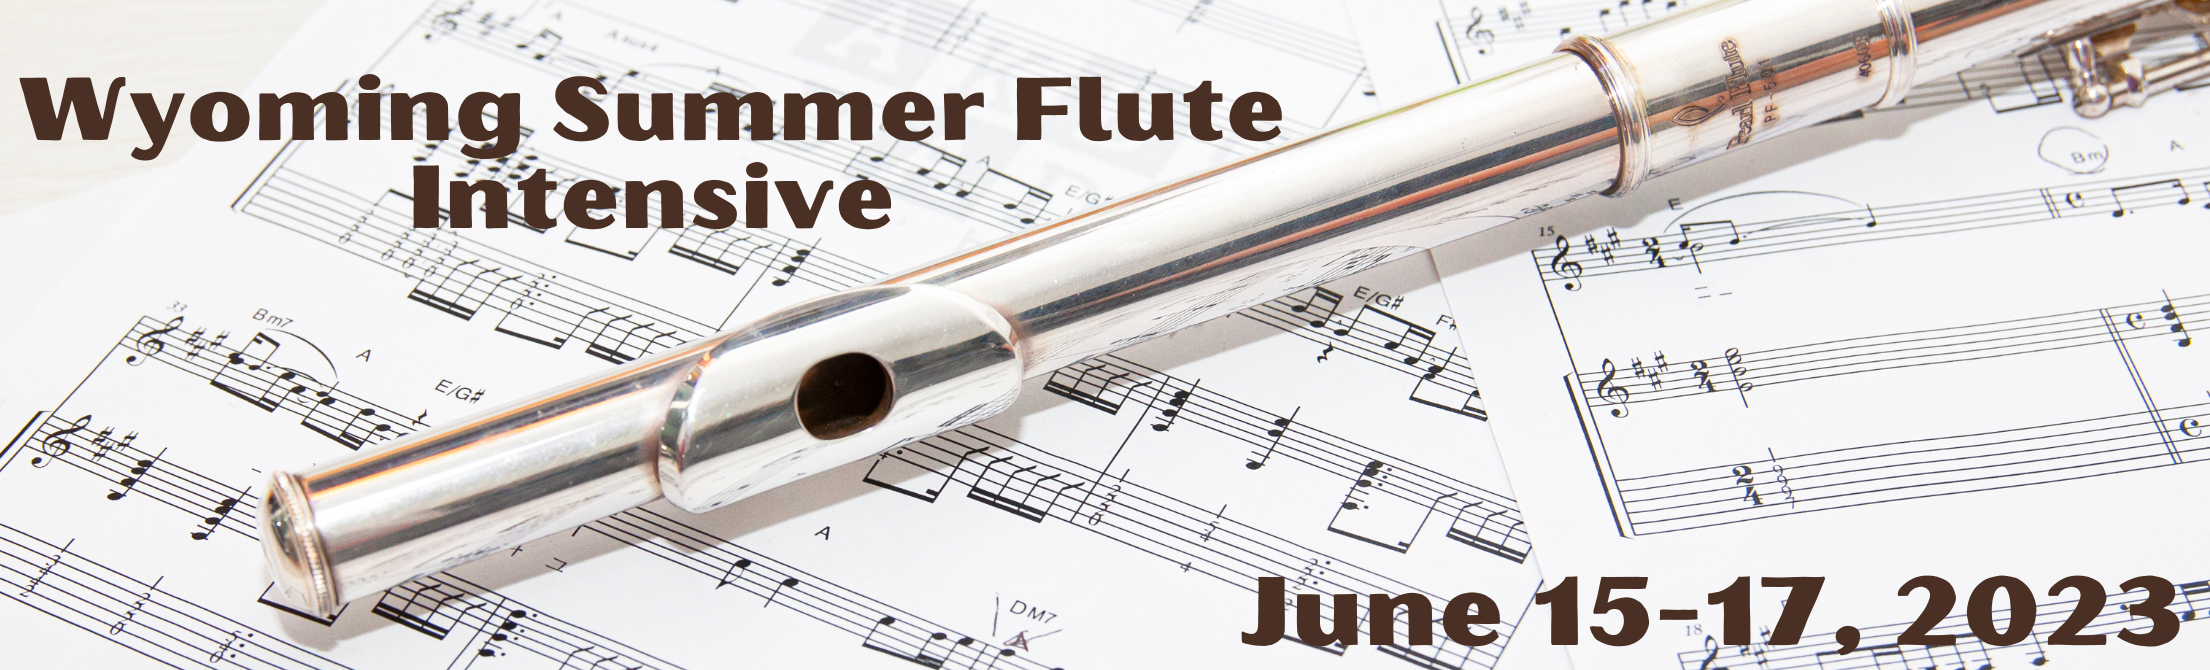 Wyoming Summer Flute Intensive